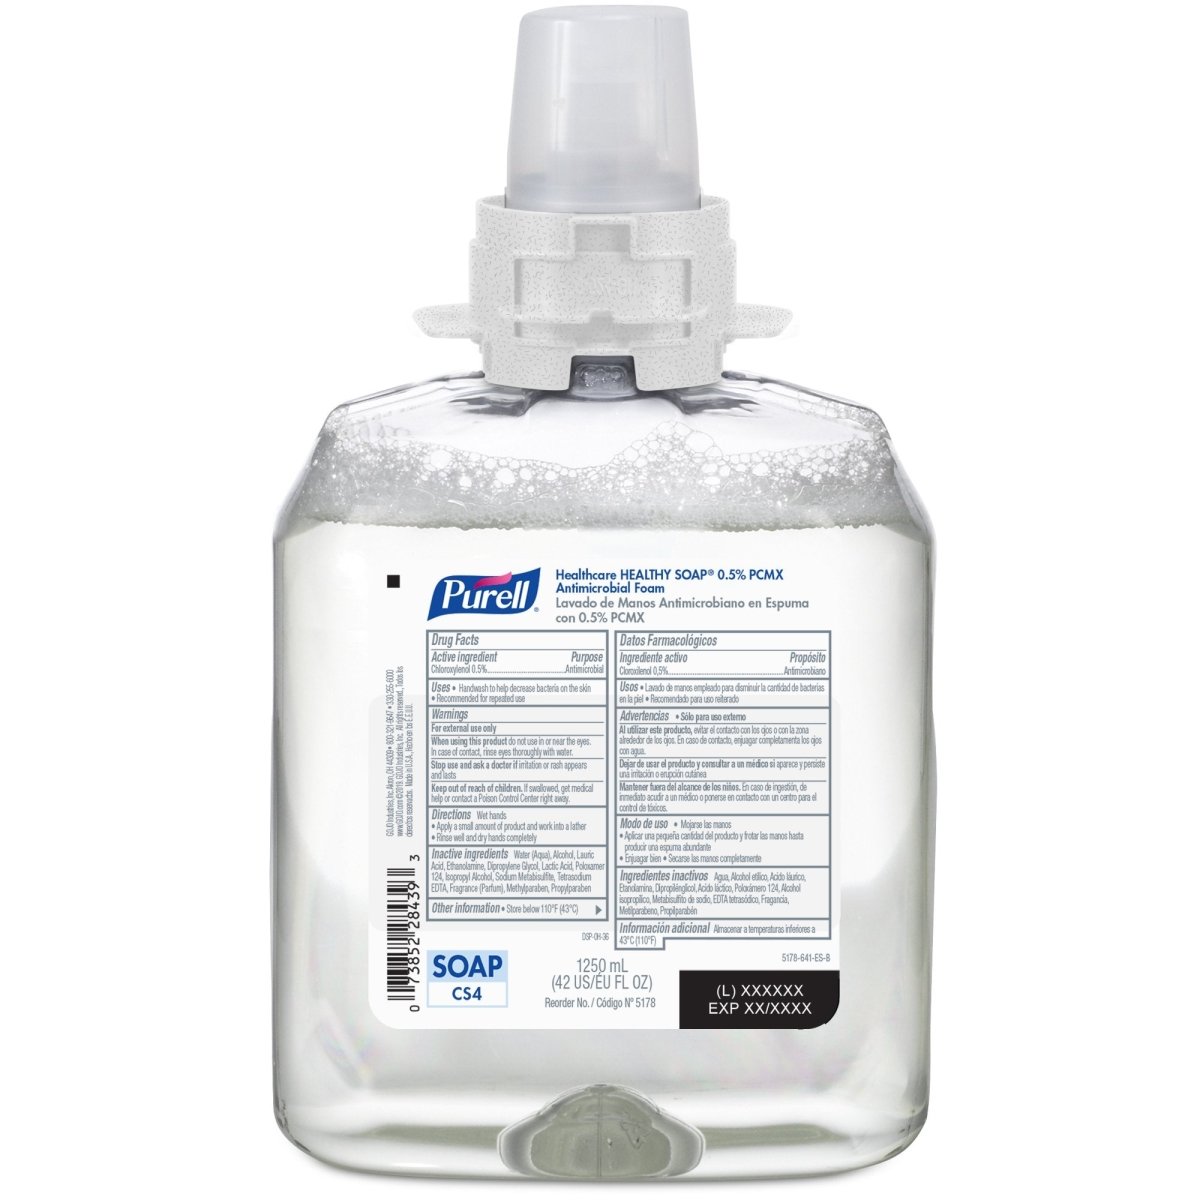 Antimicrobial Soap Purell Healthy Soap Foaming 1,250 mL Dispenser Refill Bottle Floral Scent - 1169605_EA - 2